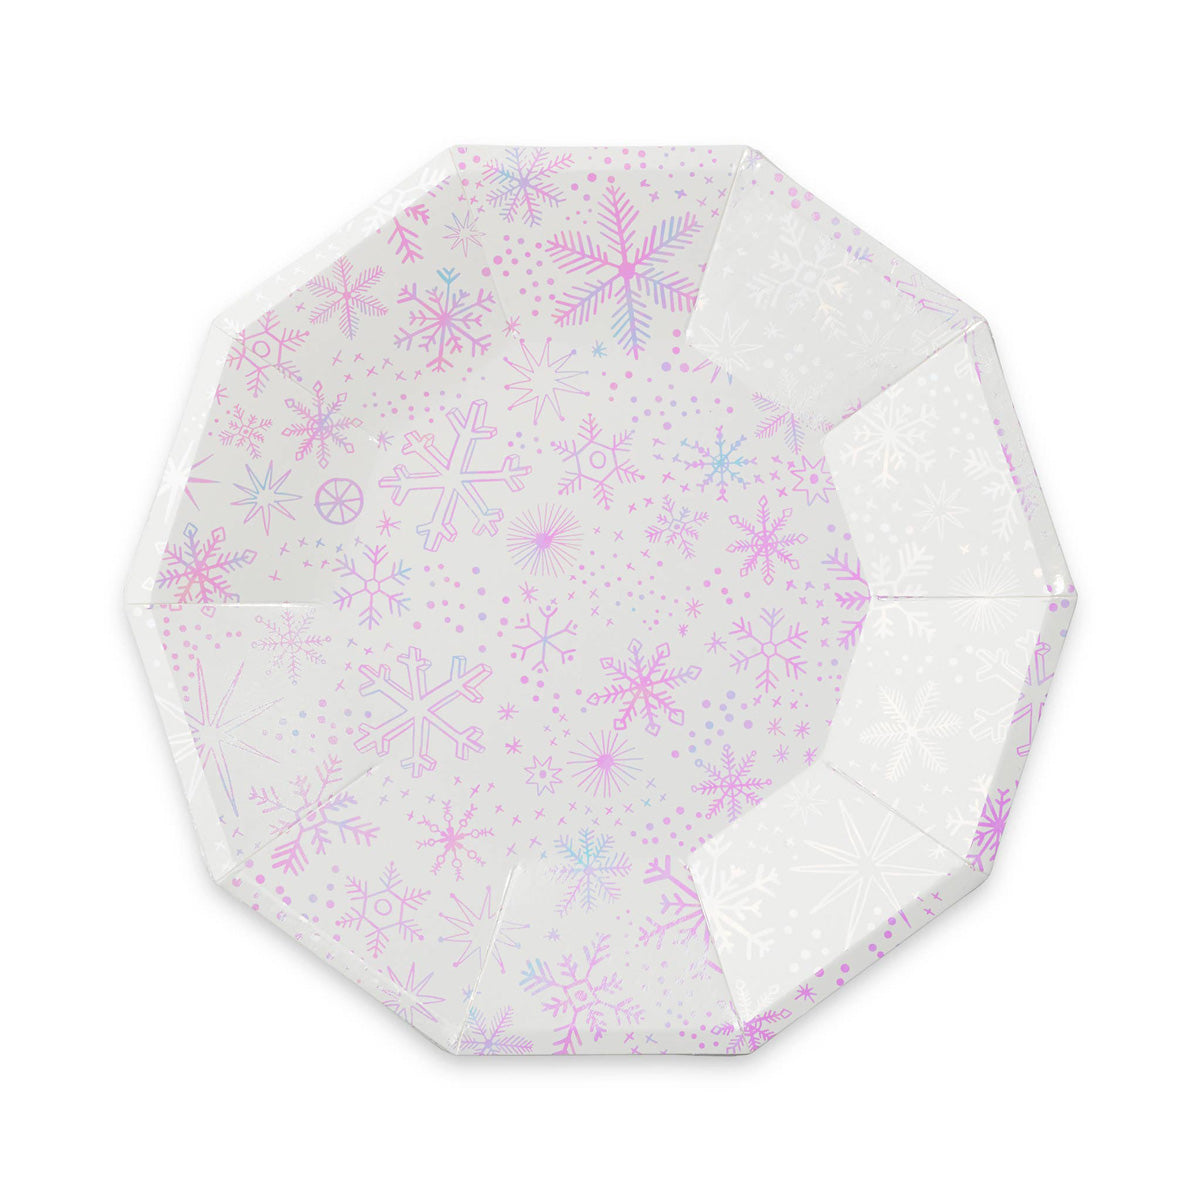 Iridescent Frosted Snowflake Party Plates Large Daydream Society GenWoo Shop Party Tableware